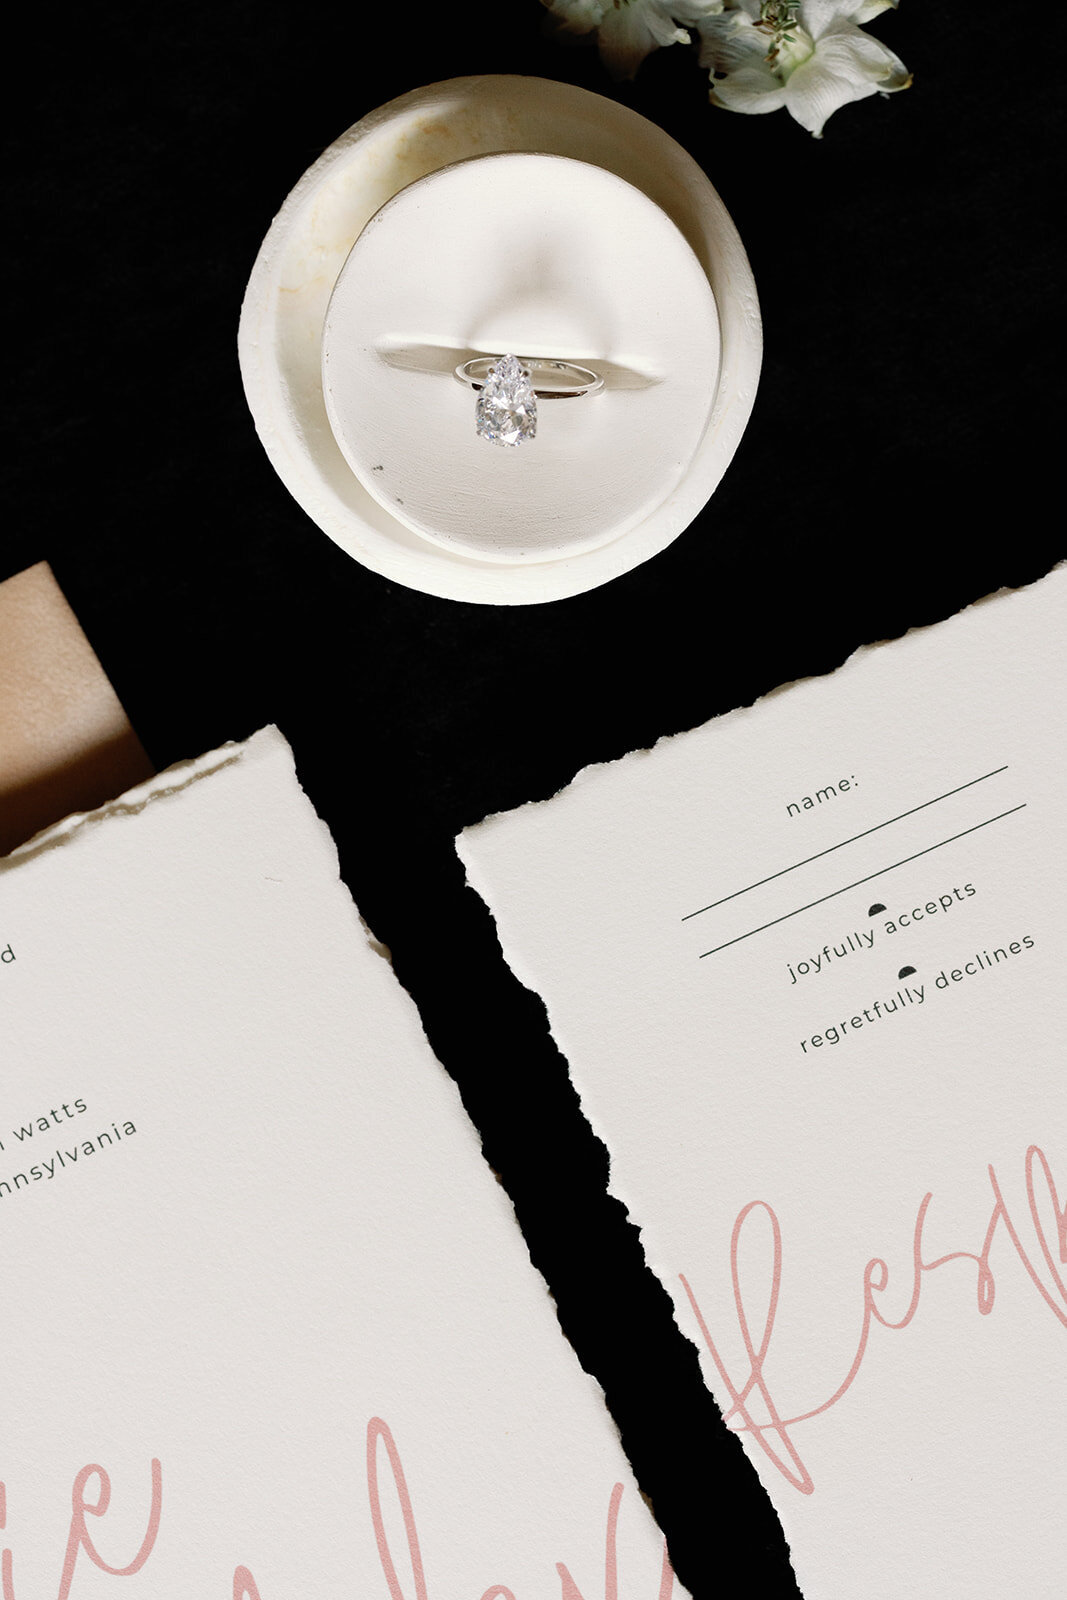 Close-up of wedding stationery and a diamond ring in a ring box